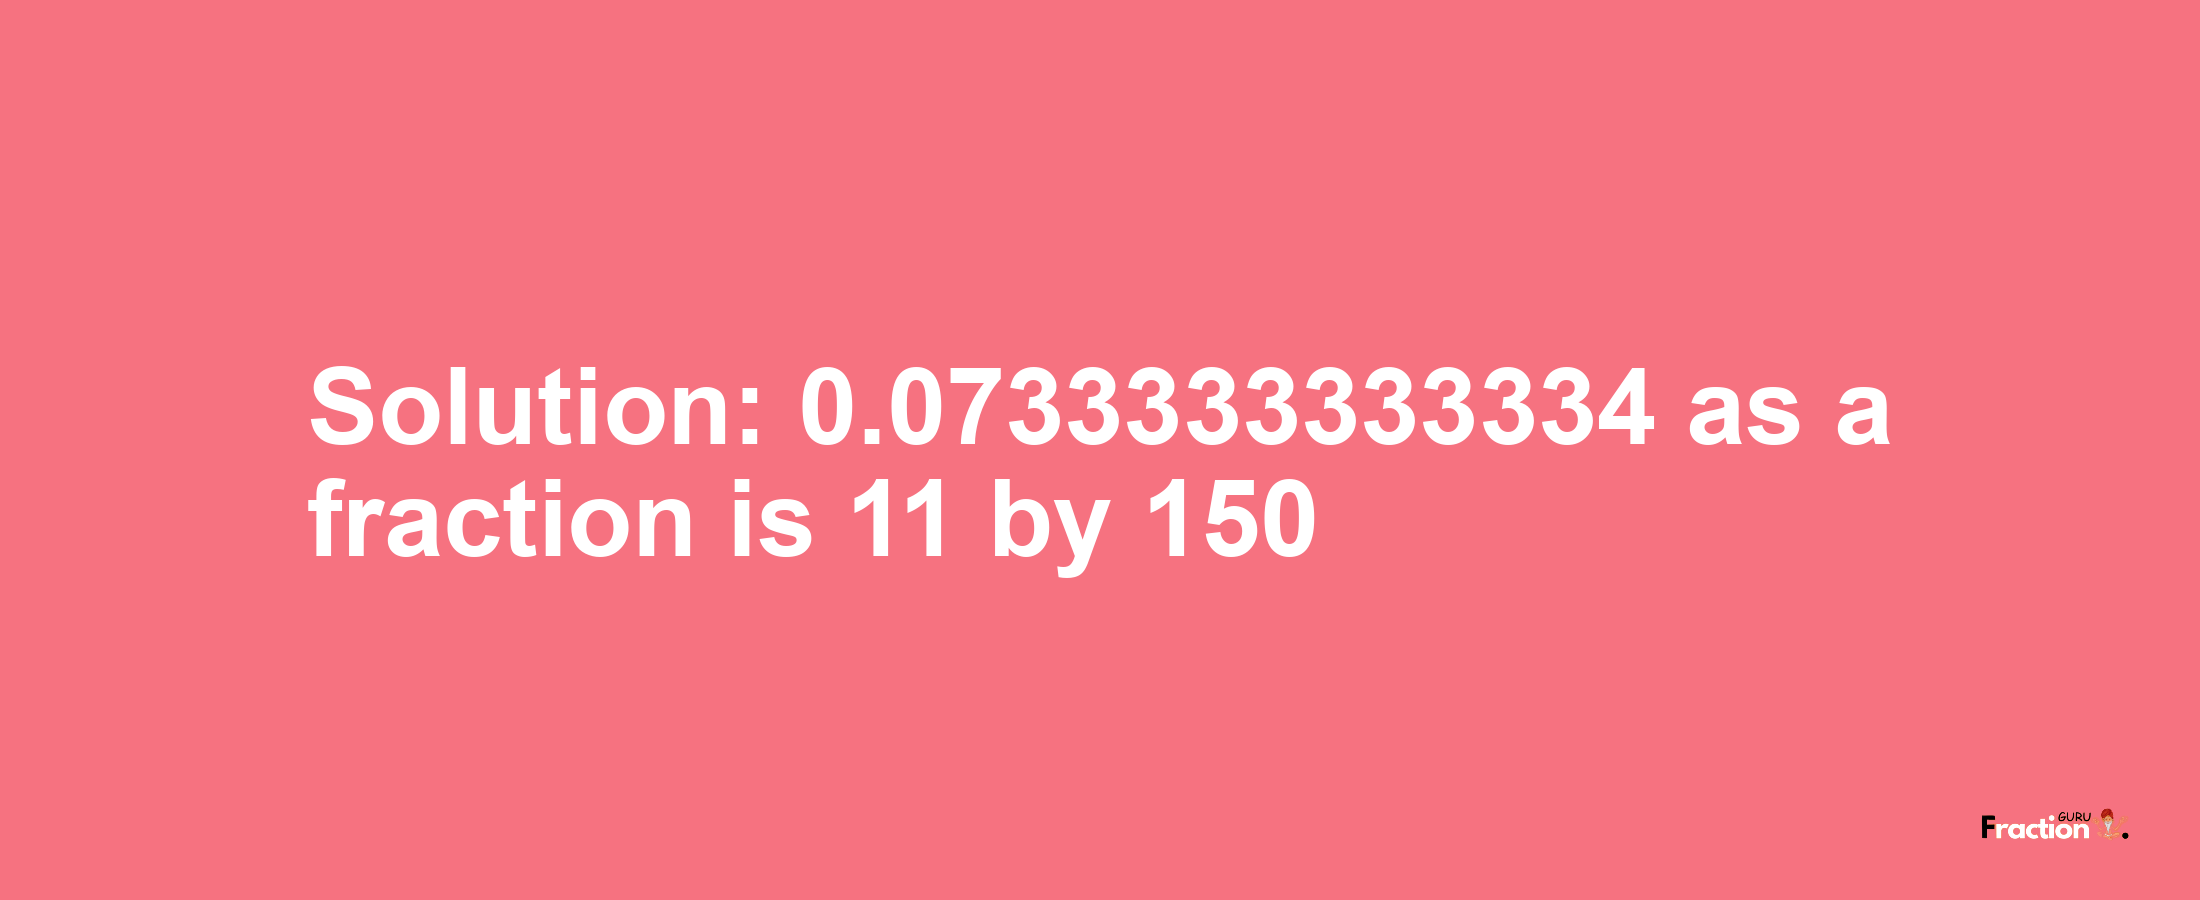 Solution:0.0733333333334 as a fraction is 11/150